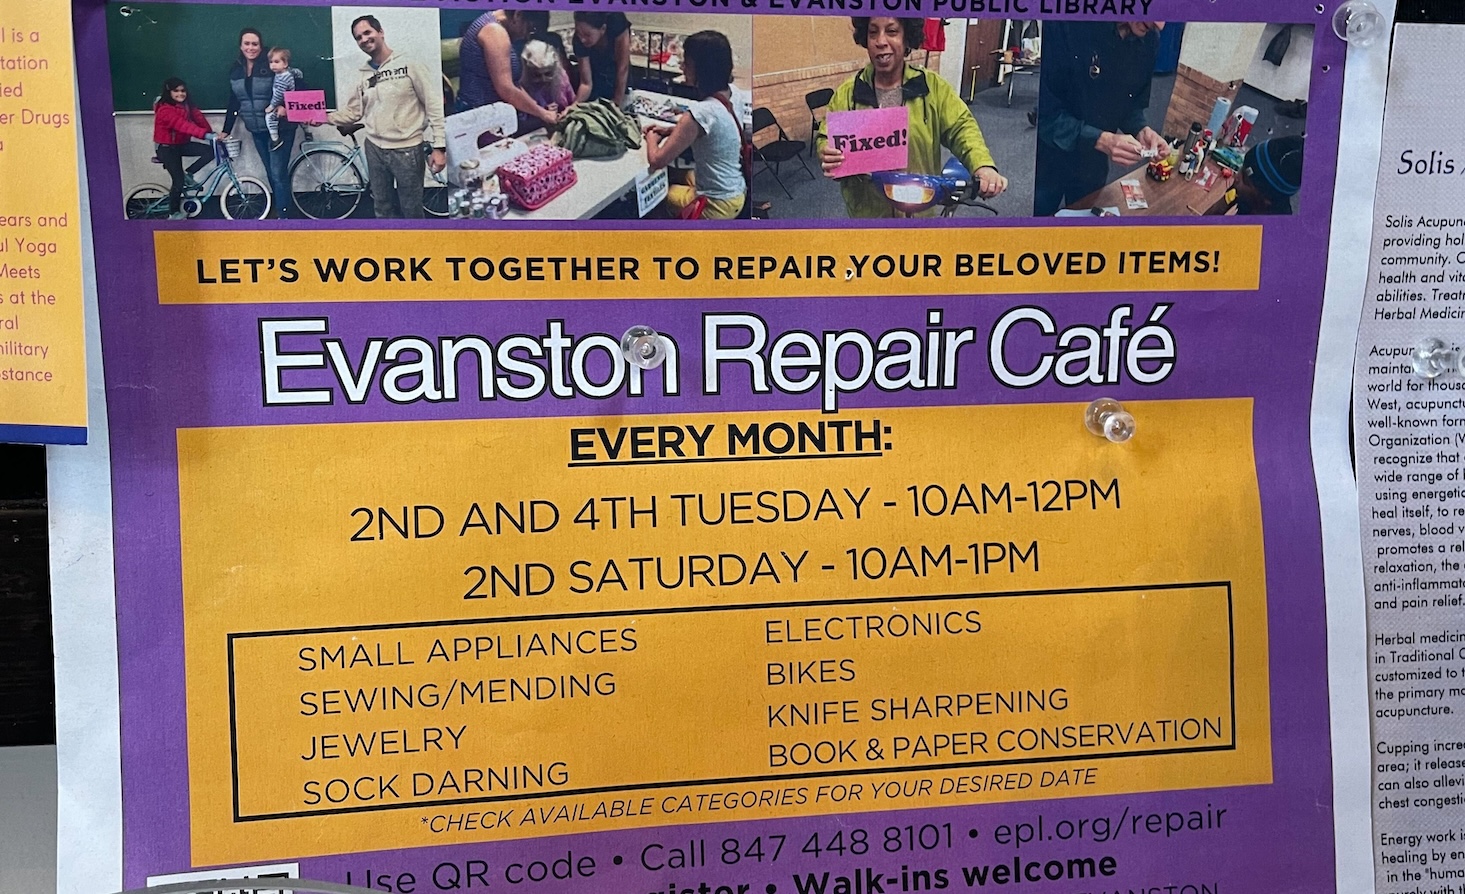 A bulletin board sign for a repair cafe in Evanston, Illinois, in February.